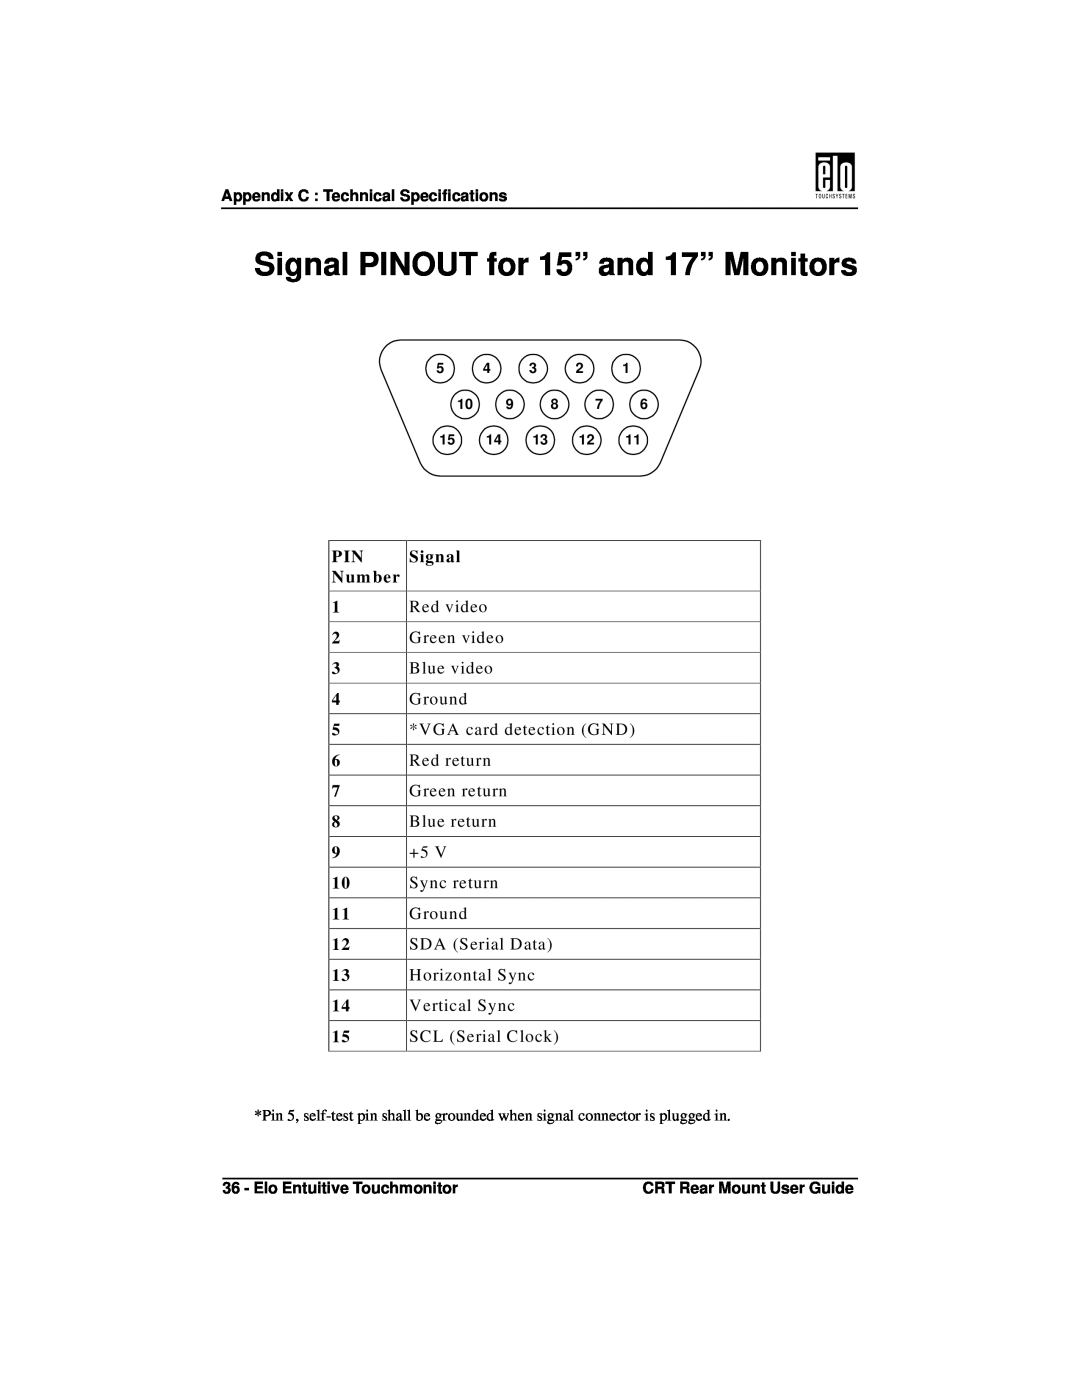 Elo TouchSystems ET1745C, ET1545C manual Signal PINOUT for 15” and 17” Monitors, P IN N um ber, 10 9 8 7 15 14 13 12 